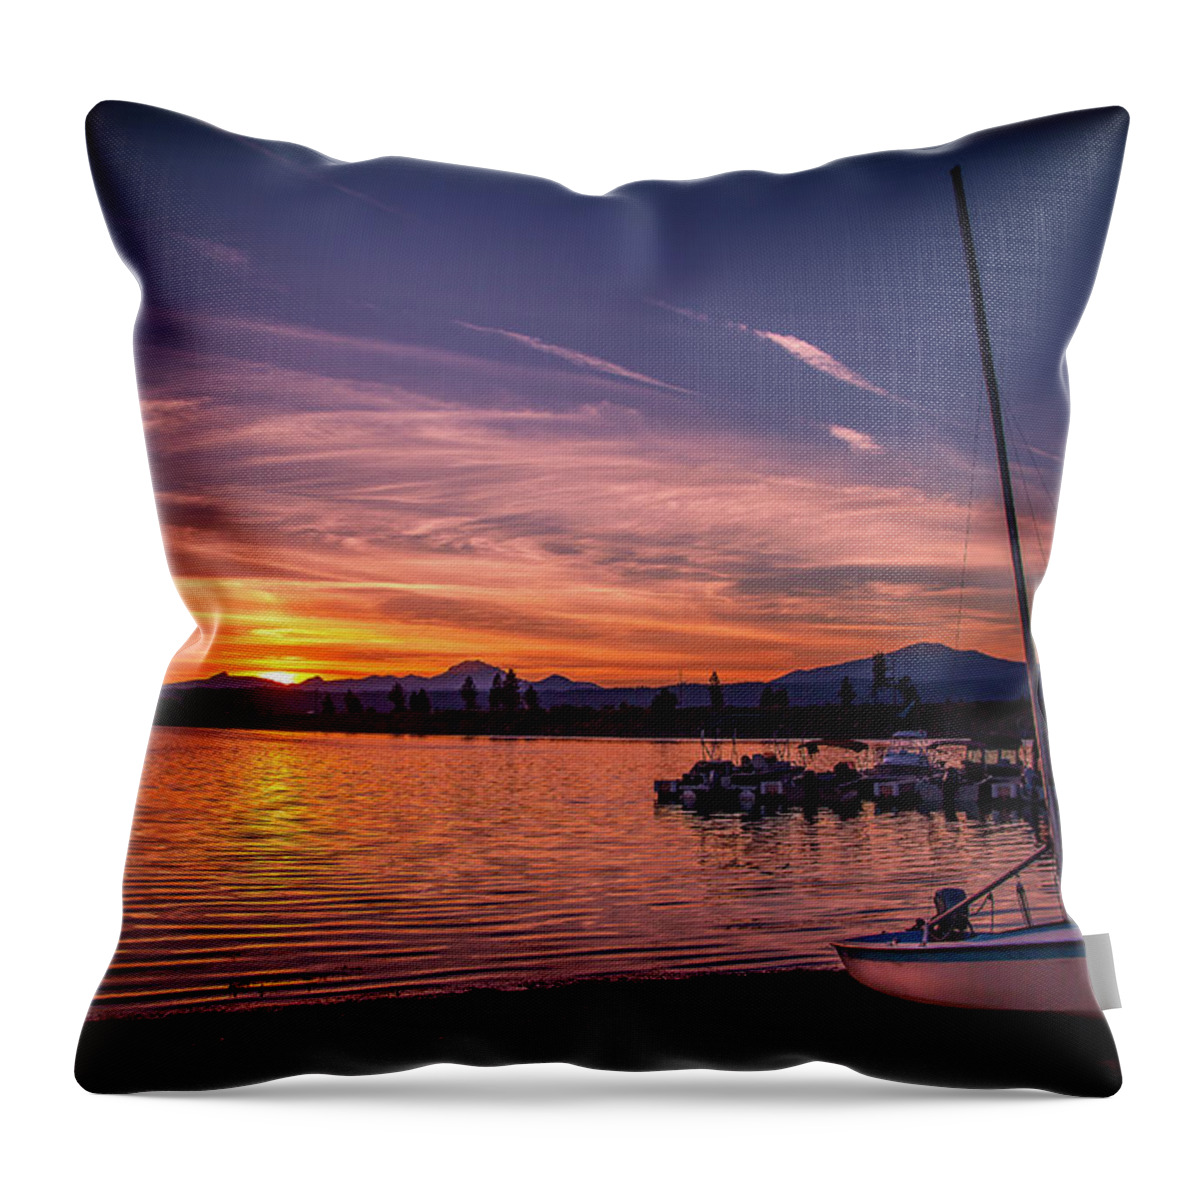 Lake Almanor Throw Pillow featuring the photograph Lake Almanor Sunset by Bradley Morris